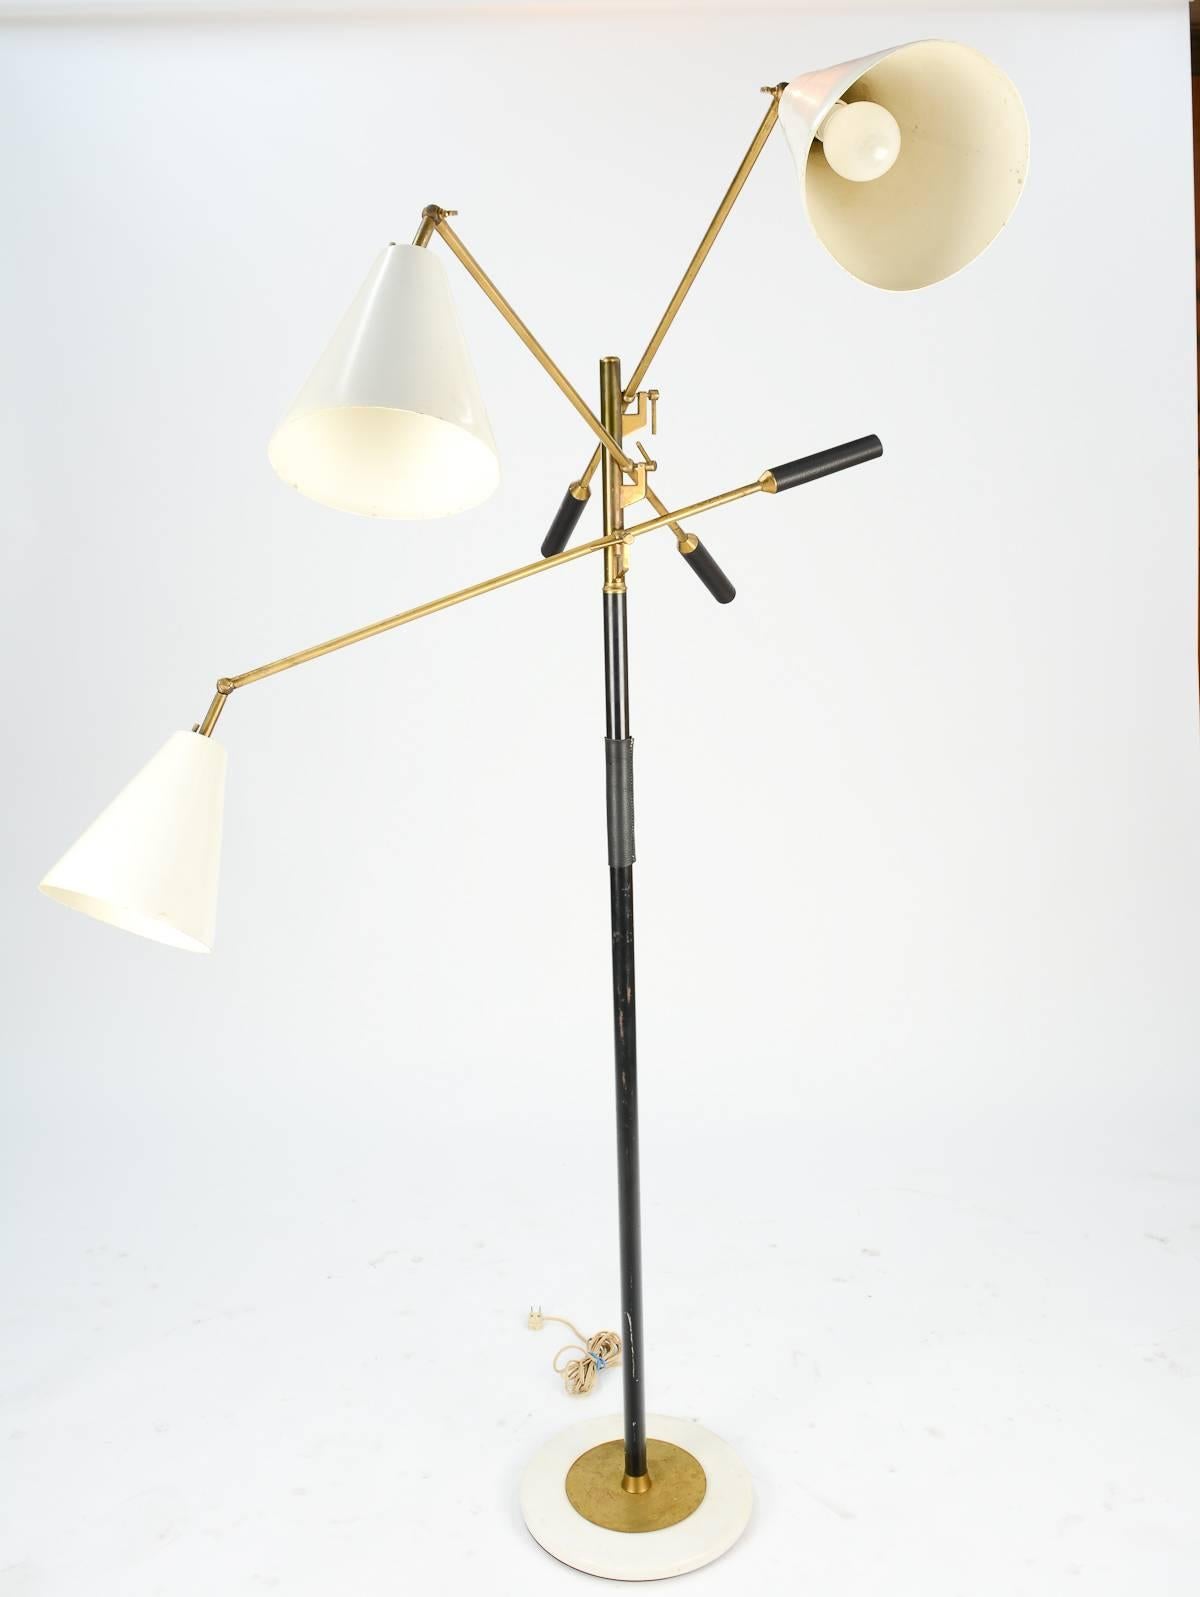 Mid-20th Century Finely Detailed Floor Lamp with Brass Arms and Italian Marble Base For Sale